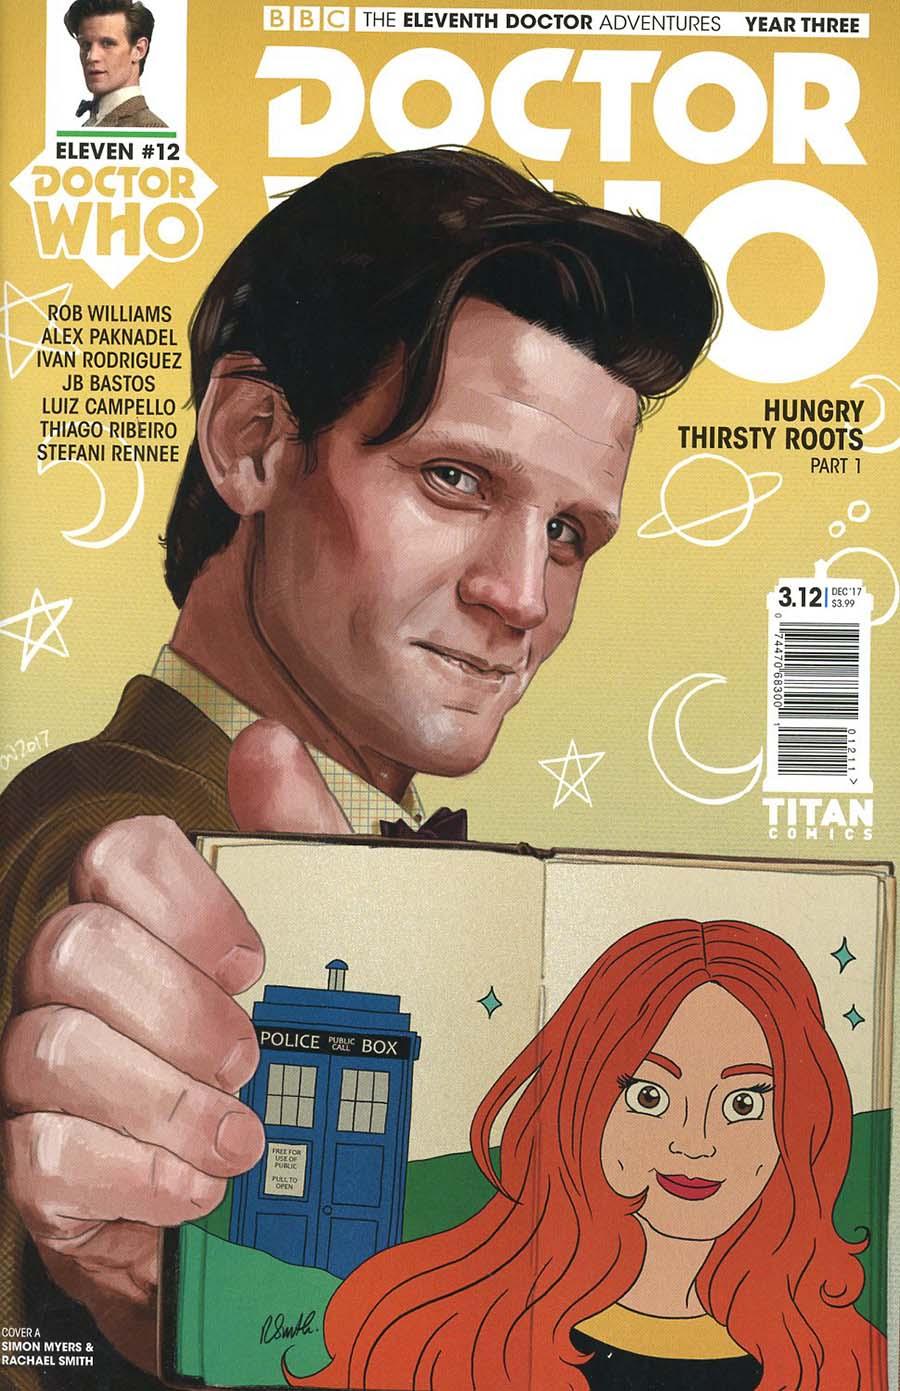 Doctor Who 11th Doctor Year Three Vol. 1 #12